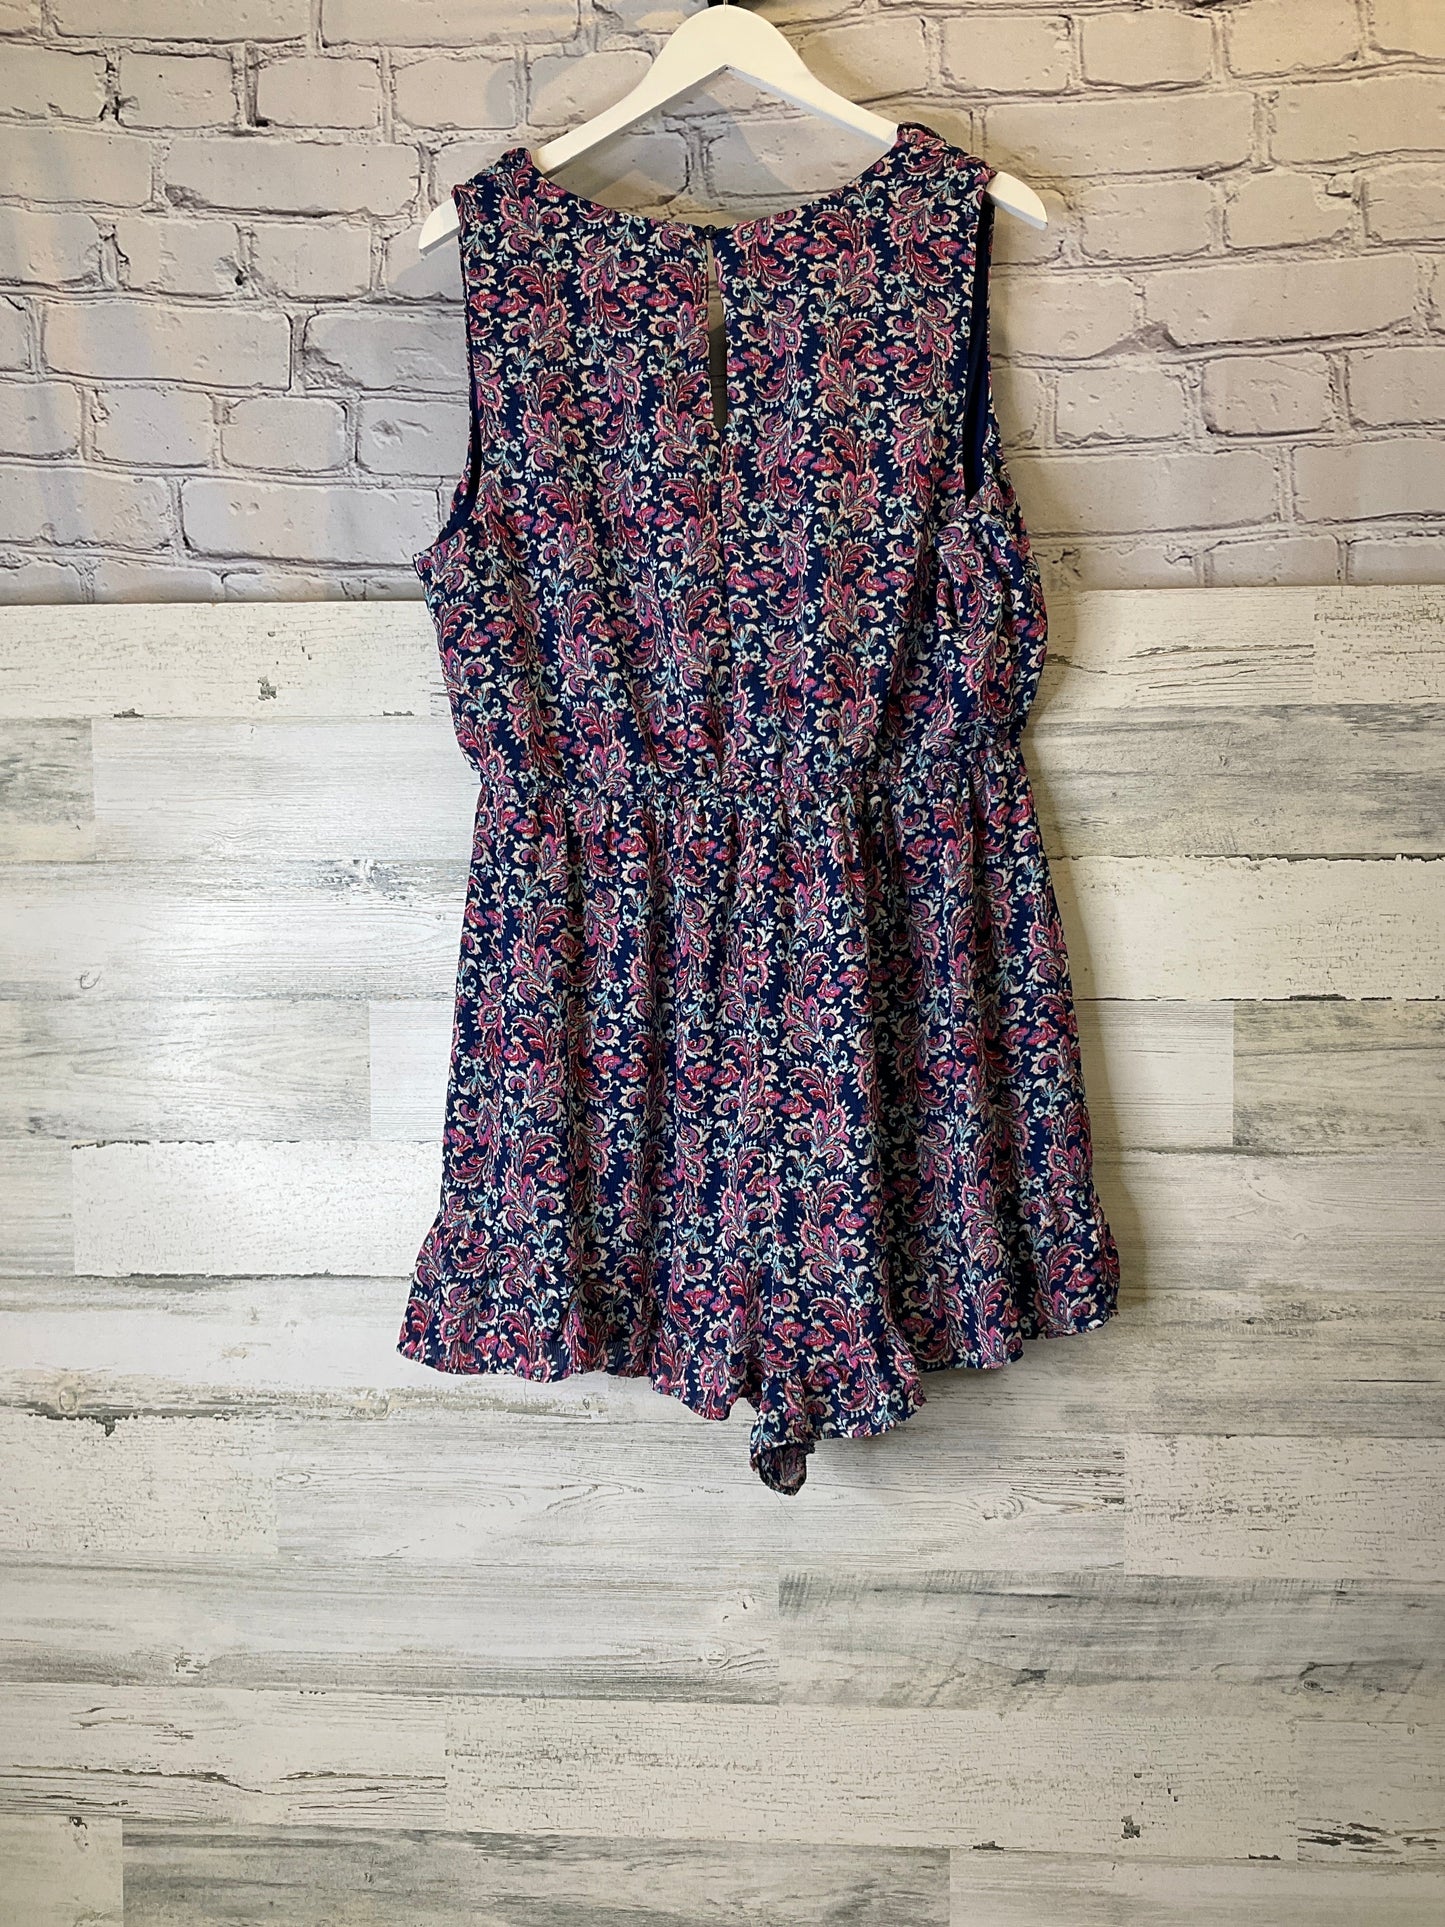 Romper By Charming Charlie  Size: 1x